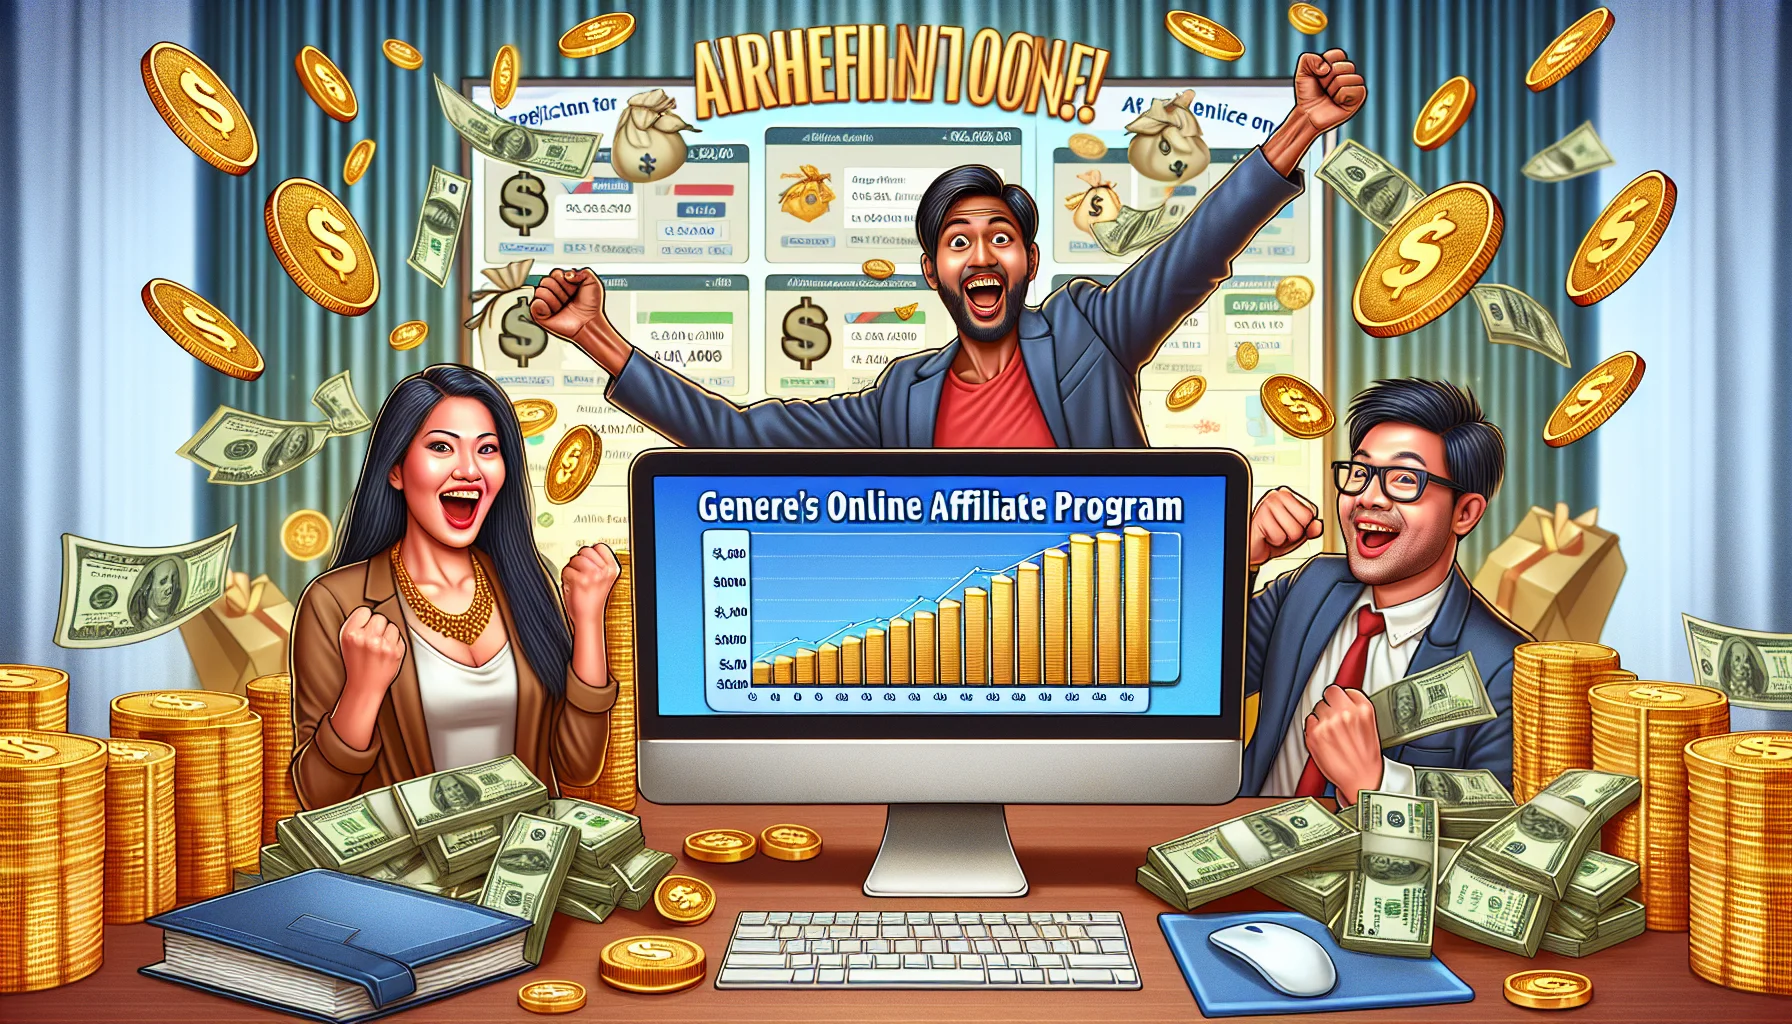 Generate a humorous, realistic image depicting a generic online store’s affiliate program. The scene illustrates an enticing scenario of making money online. Show a computer screen displaying increasing income stats. In the foreground, a South Asian woman and a Hispanic man, both successful affiliates, joyfully celebrate their earnings. The atmosphere is full of prosperity symbols like gold coins, dollar signs, and bulging wallets. The overall tone of the image suggests that the participation in the affiliate program can be profitable and amusing.